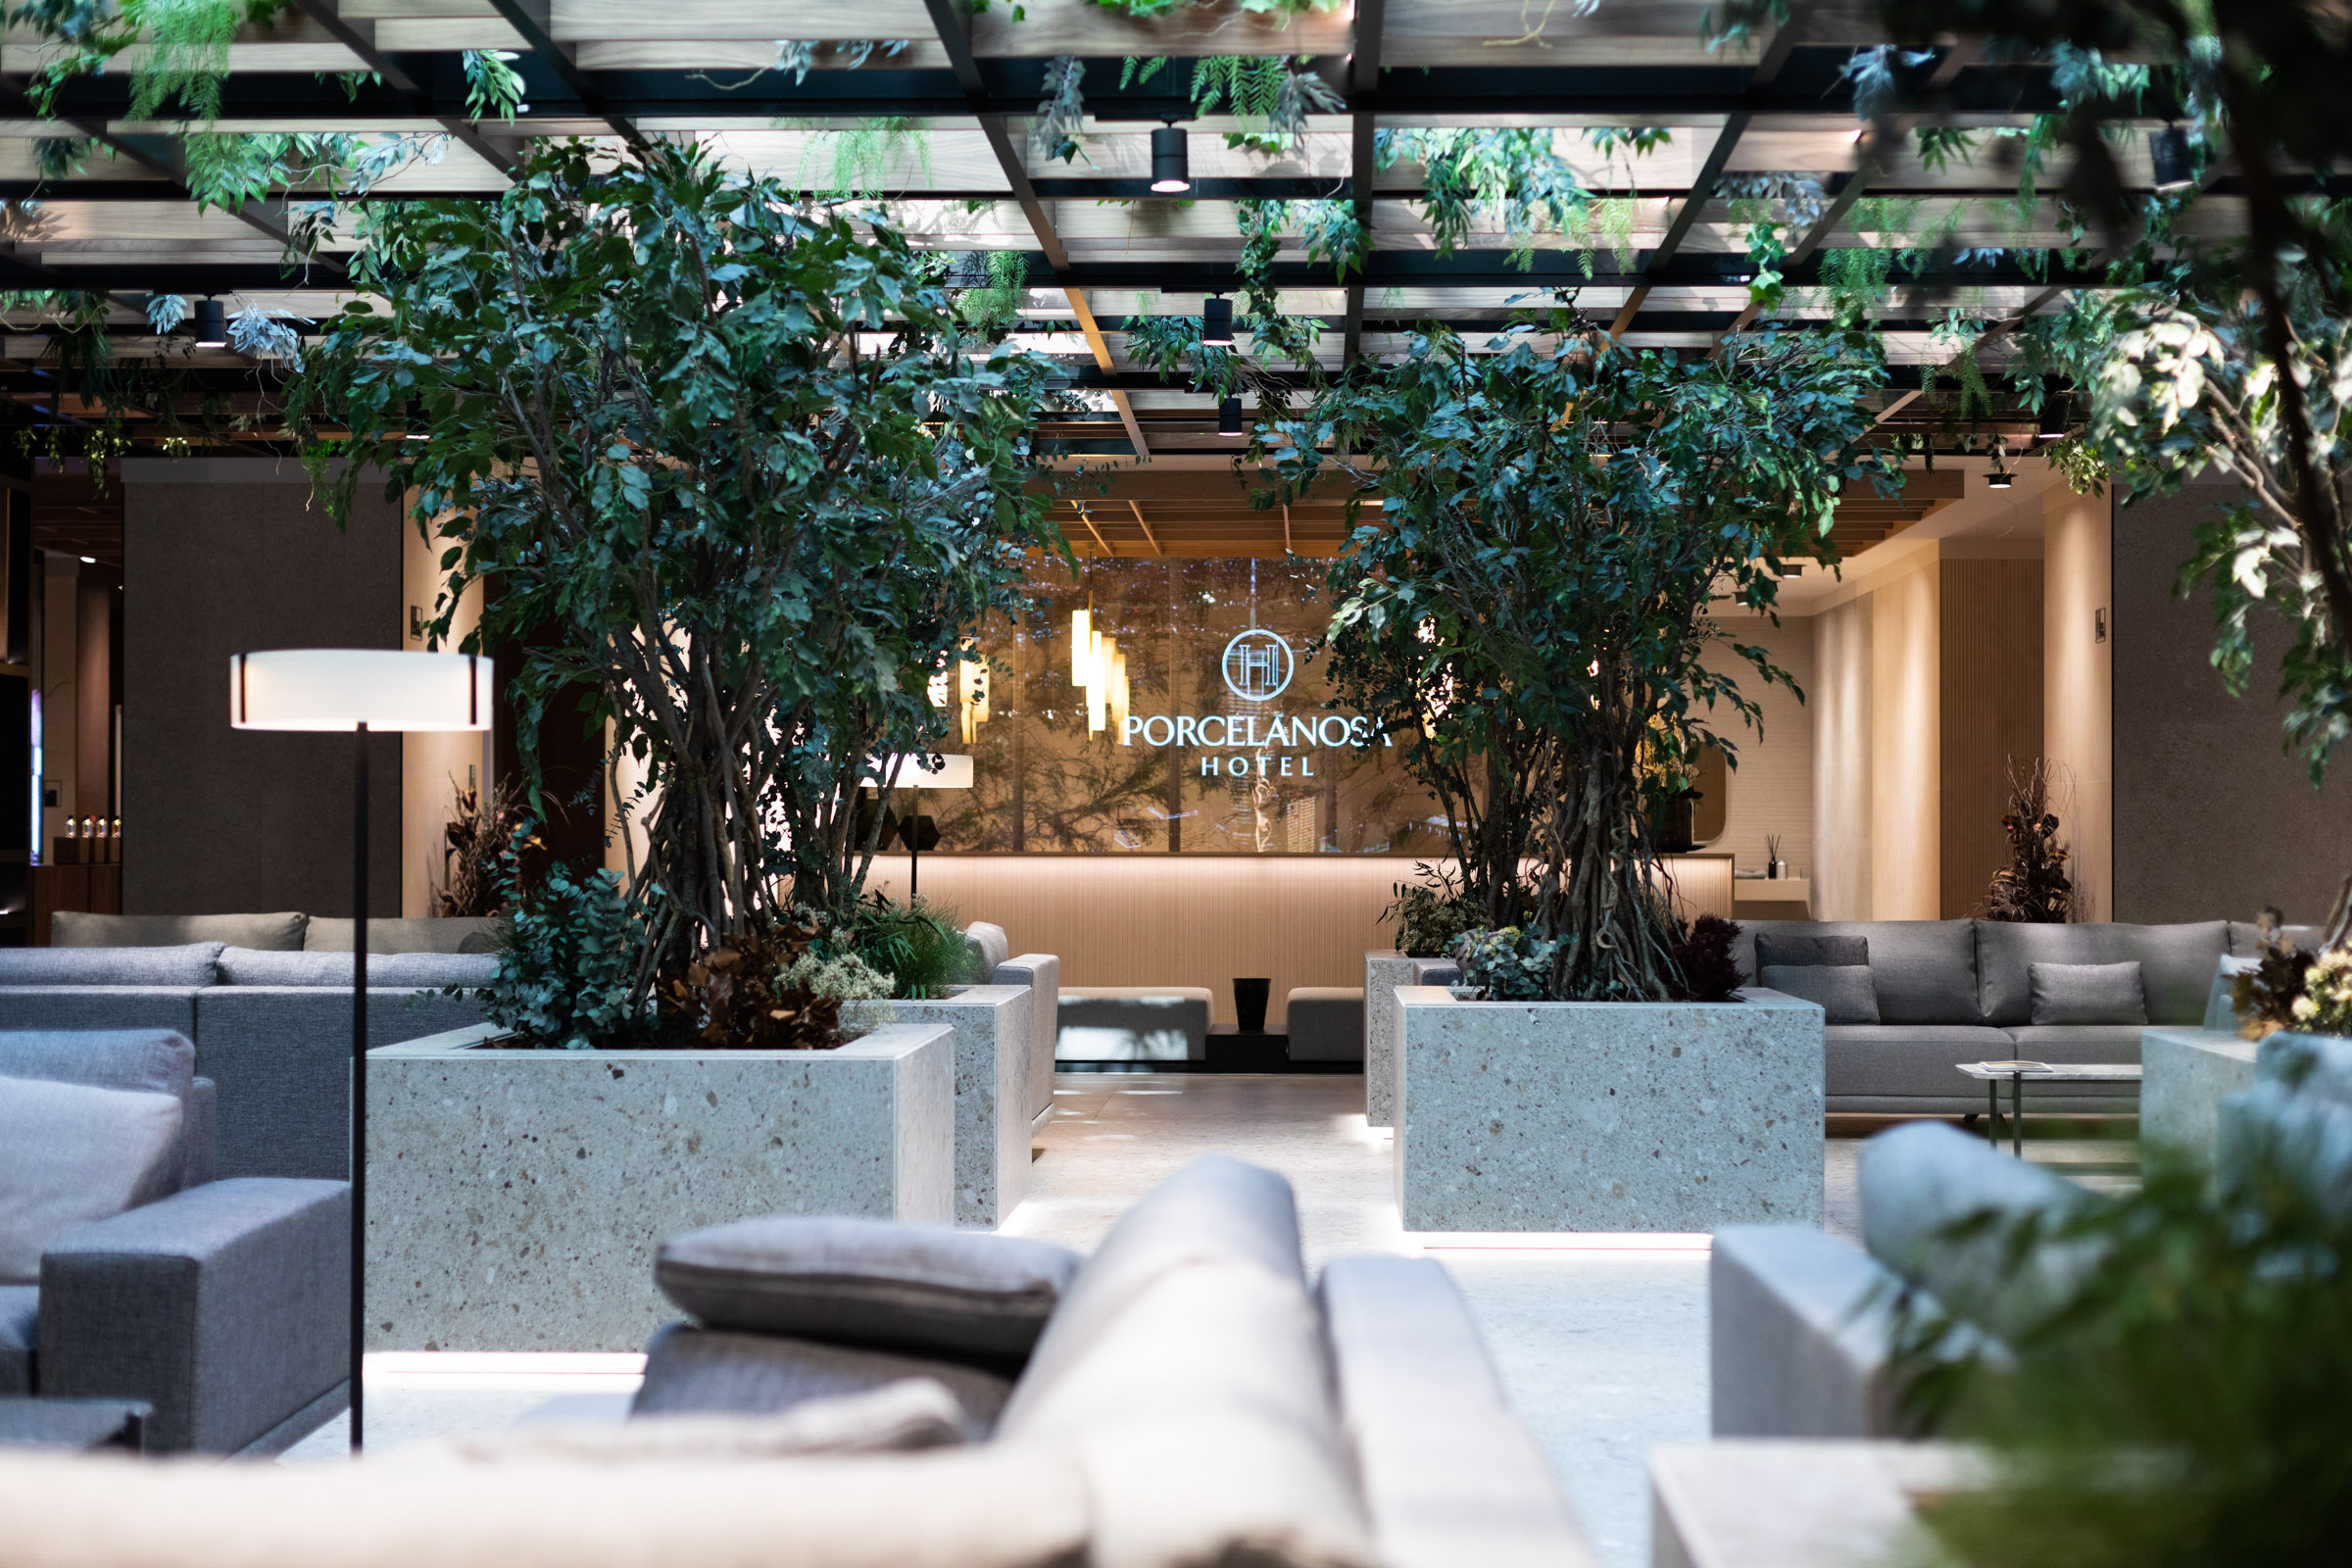 The biophilic design of the Porcelanosa Group Hotel incorporates several LZF Lamps